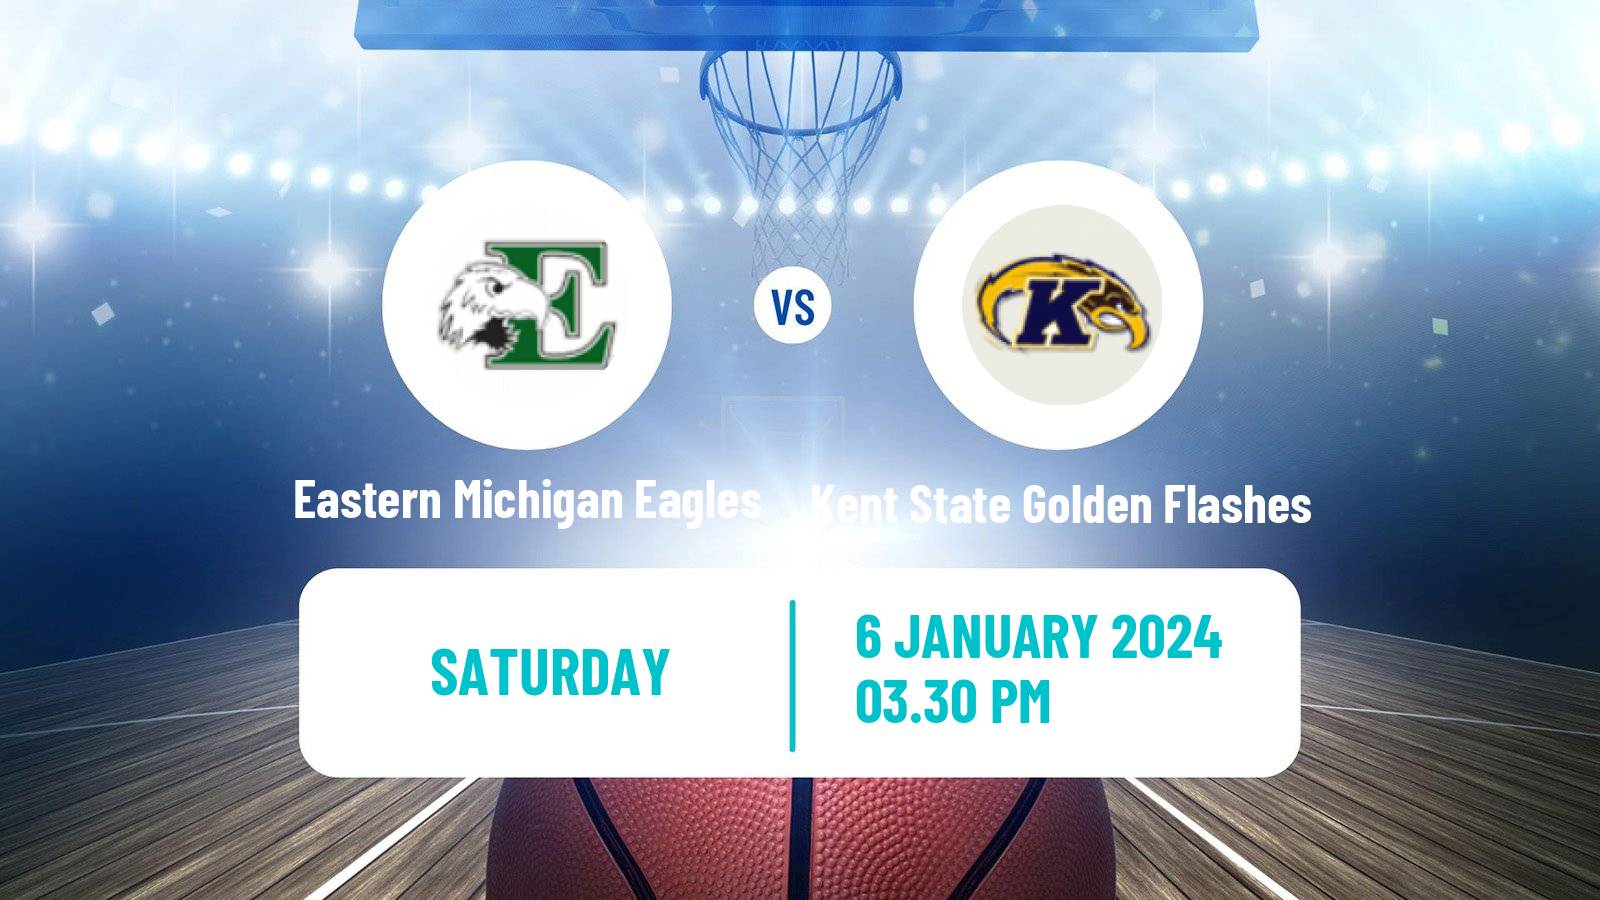 Basketball NCAA College Basketball Eastern Michigan Eagles - Kent State Golden Flashes